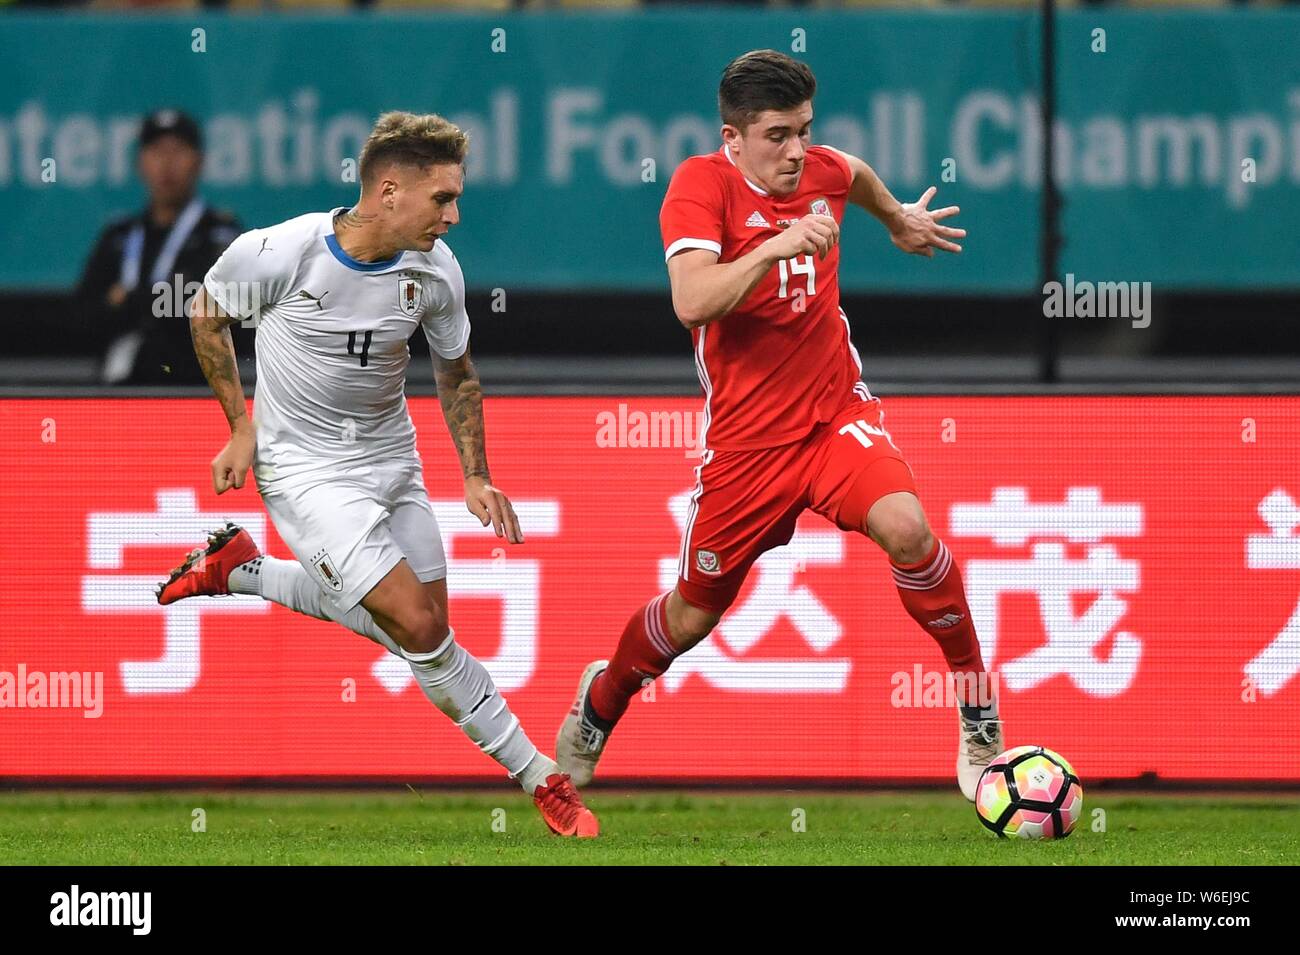 Declan John, right, of Wales national football team kicks the ball to make a pass against Guillermo Varela of Uruguay national football team in their Stock Photo